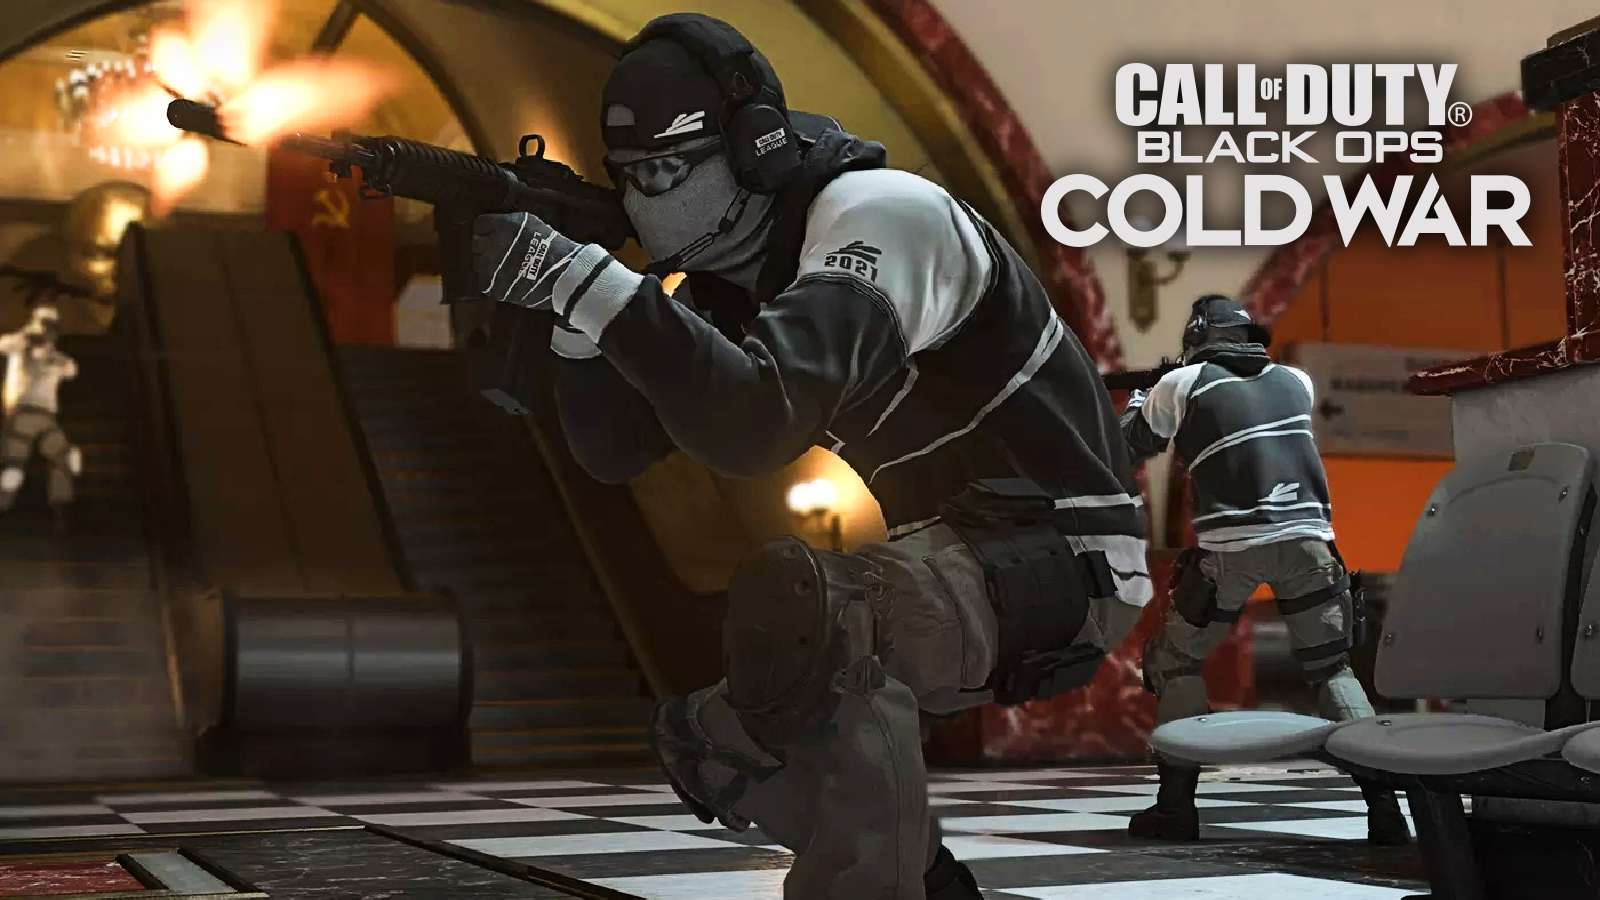 Black Ops Cold War CDL skins league play on moscow